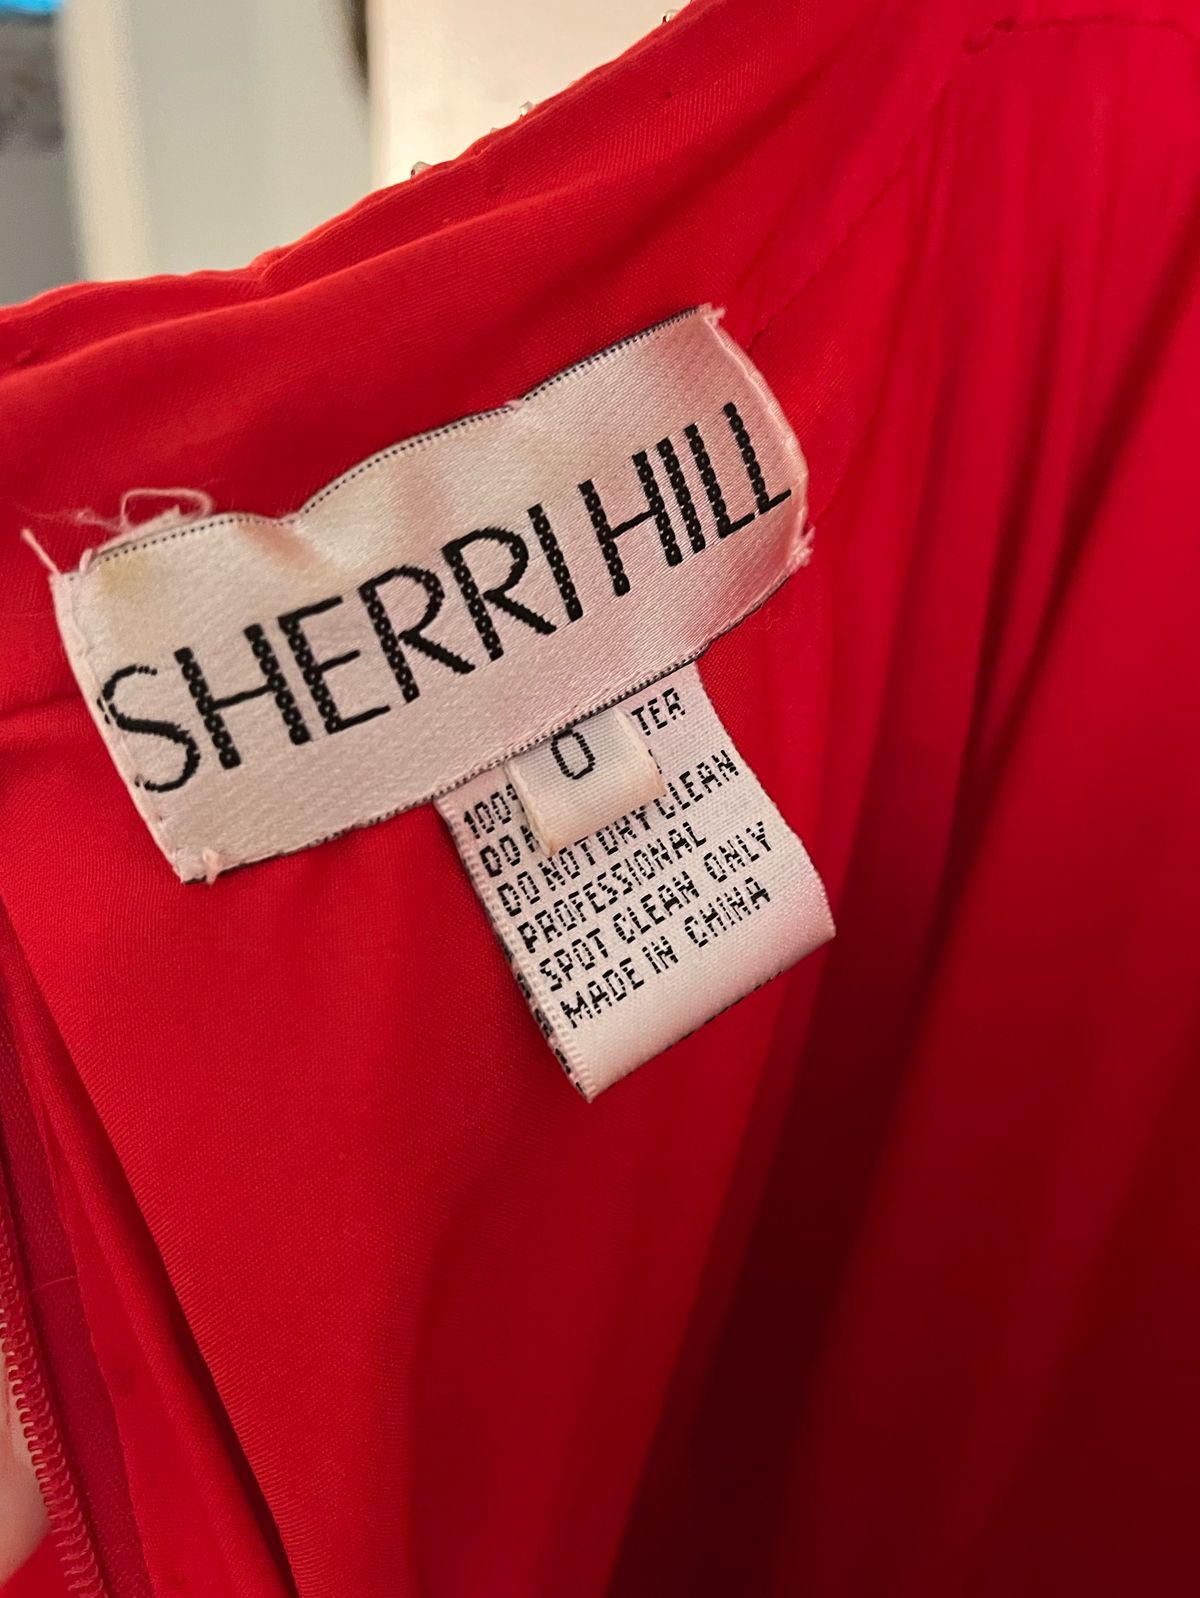 Sherri Hill Size 0 Prom Halter Satin Red A-line Dress on Queenly